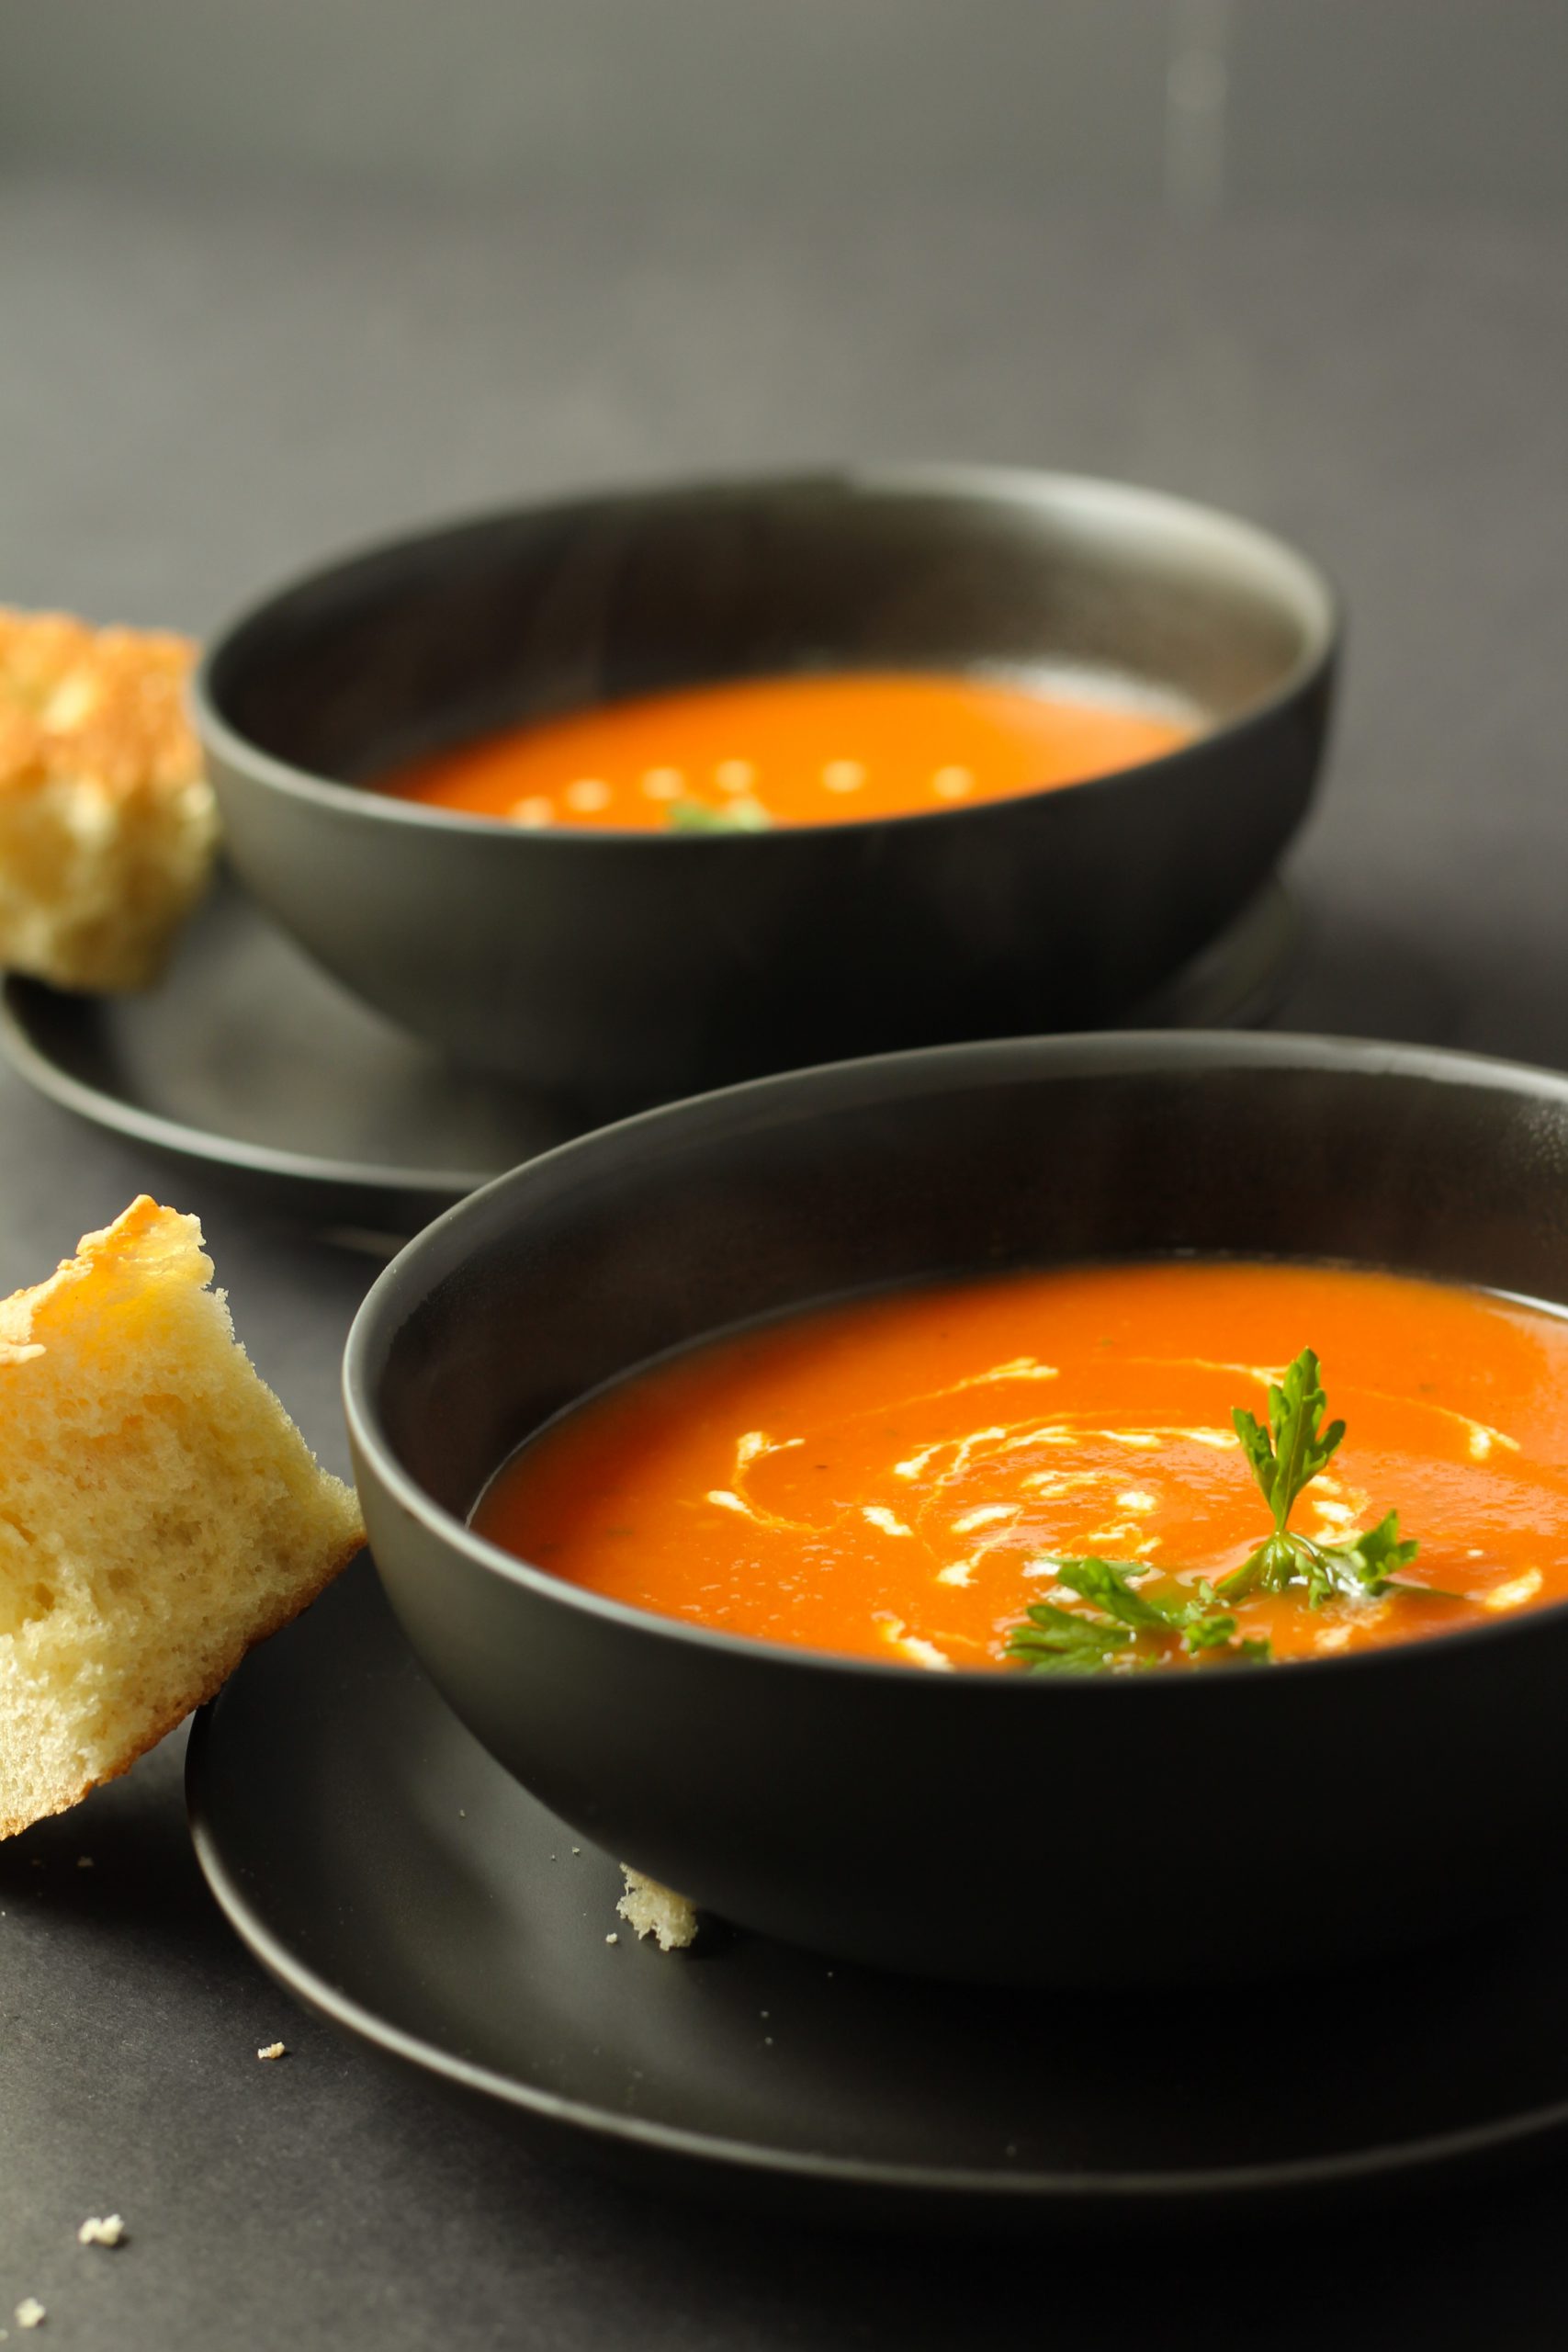 Tomato soup with garnish and heavy cream